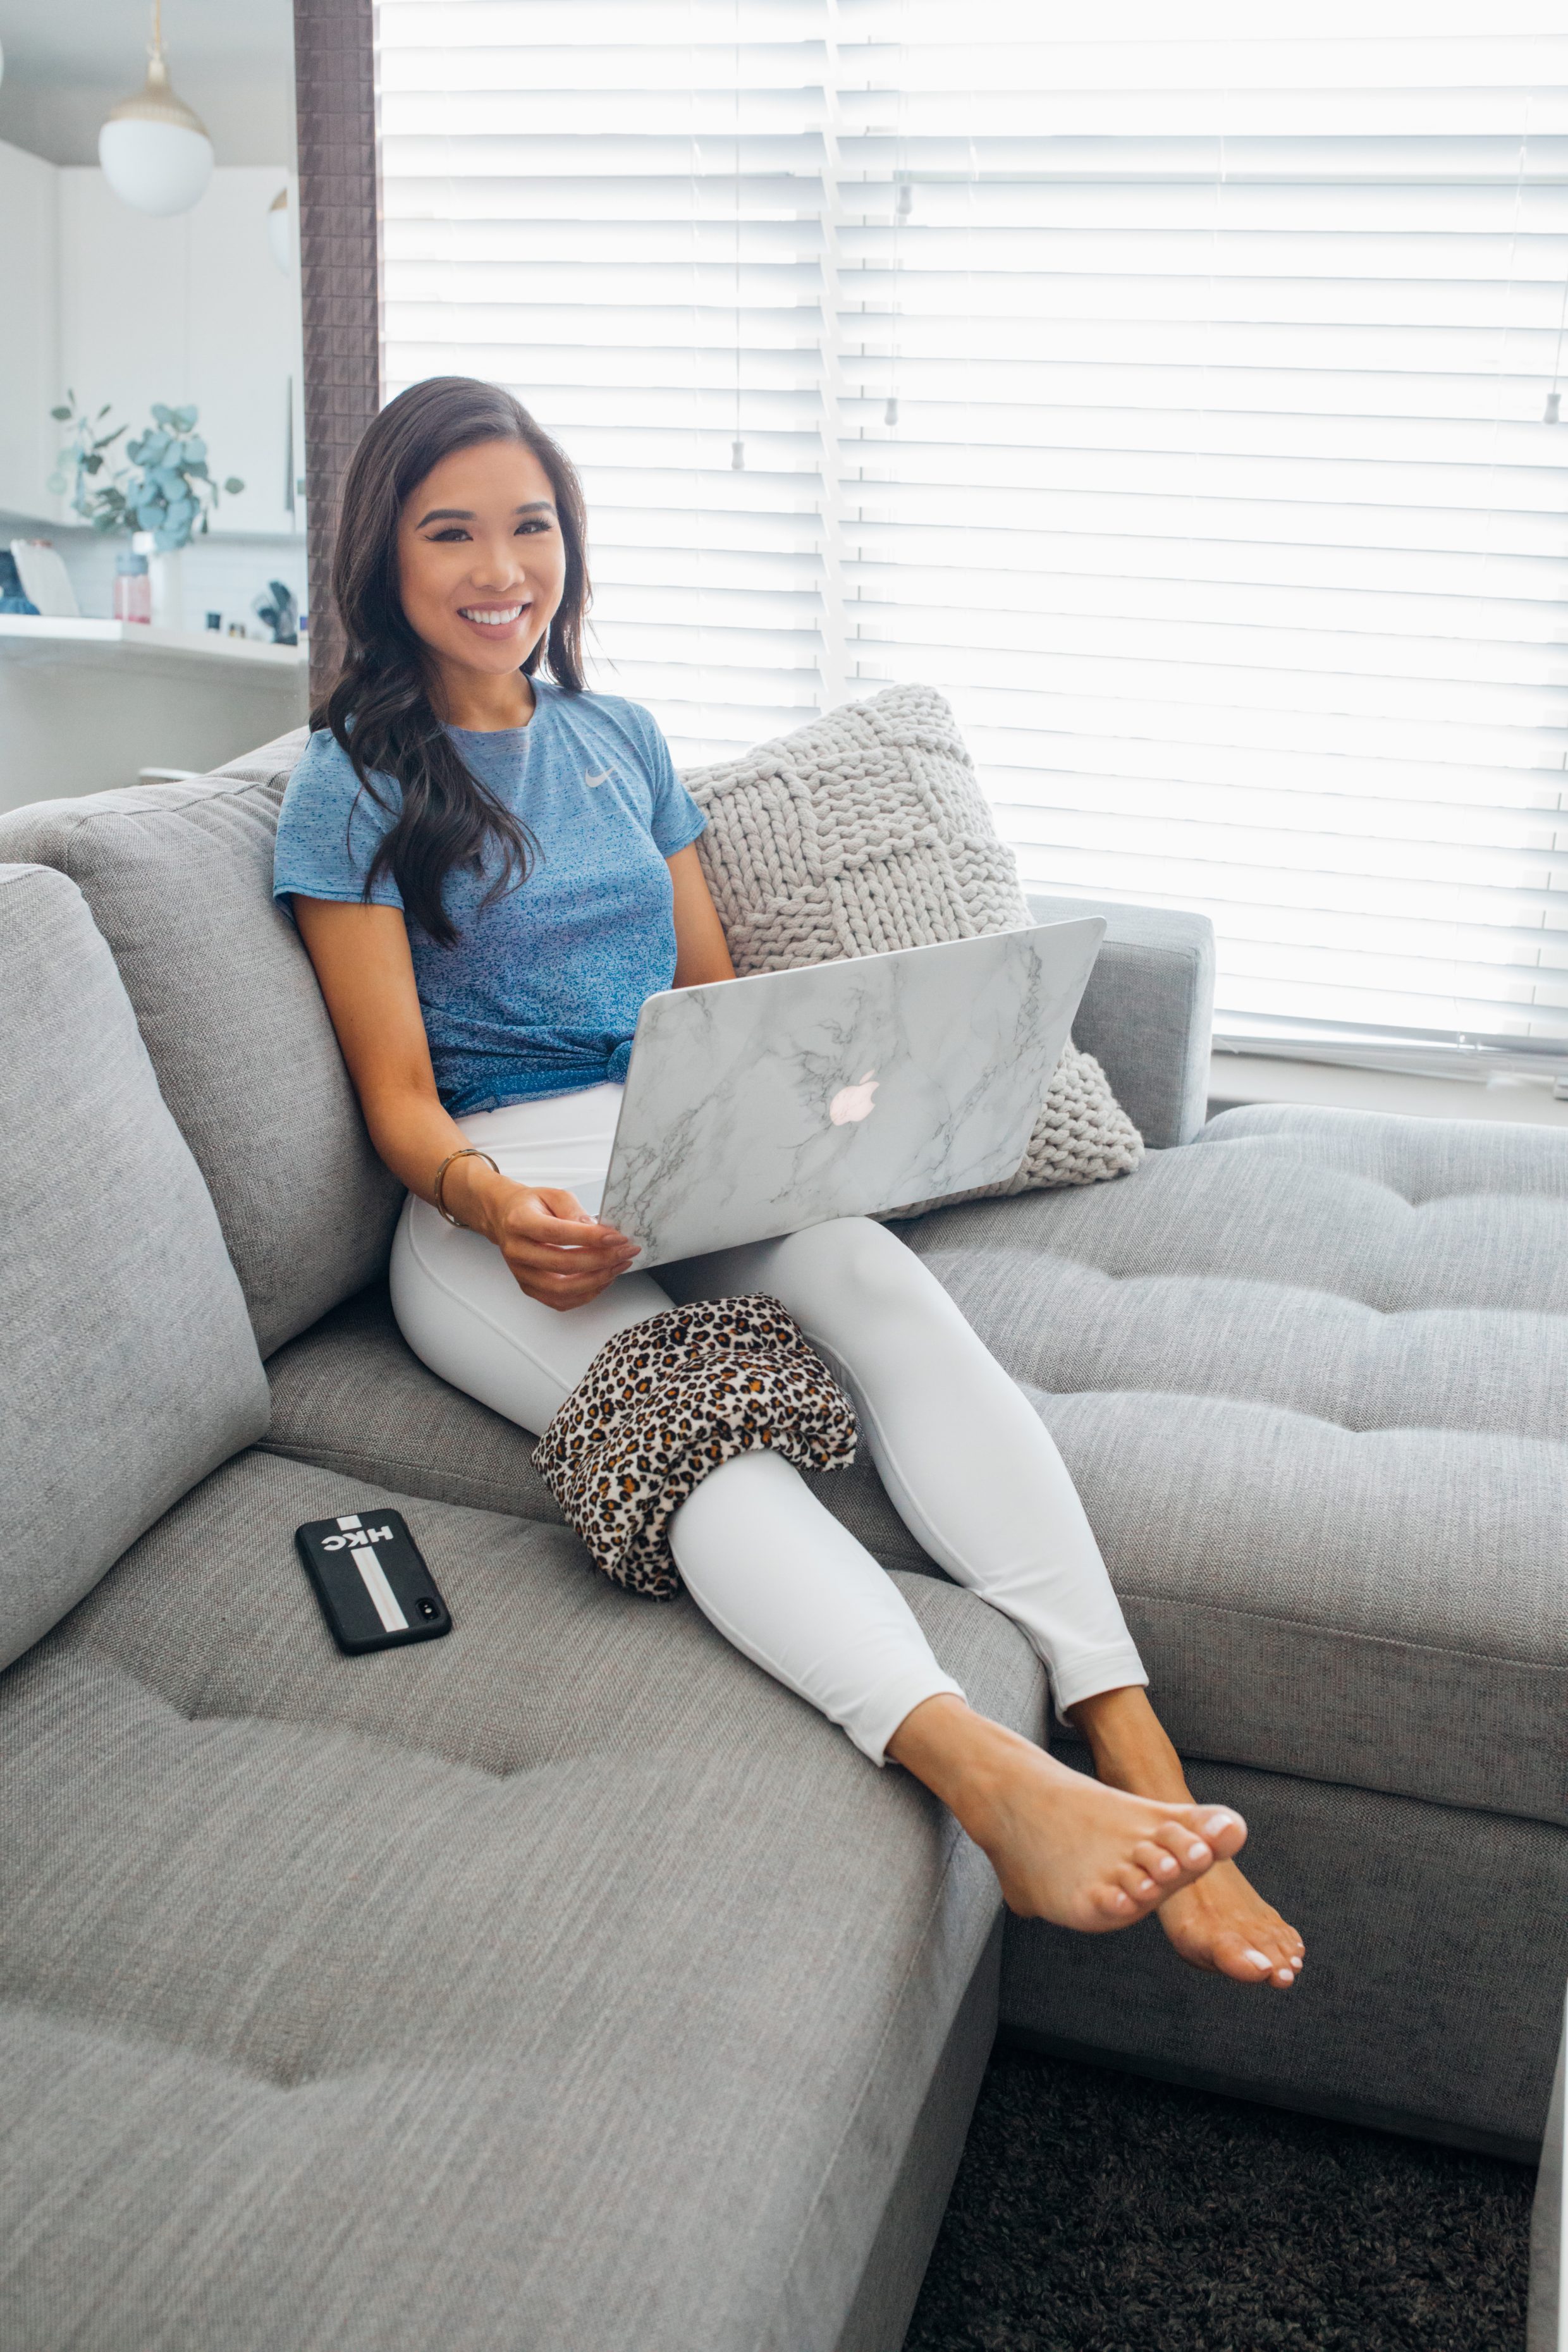 Blogger Hoang-Kim wears a blue and white activewear outfit on an Article sofa